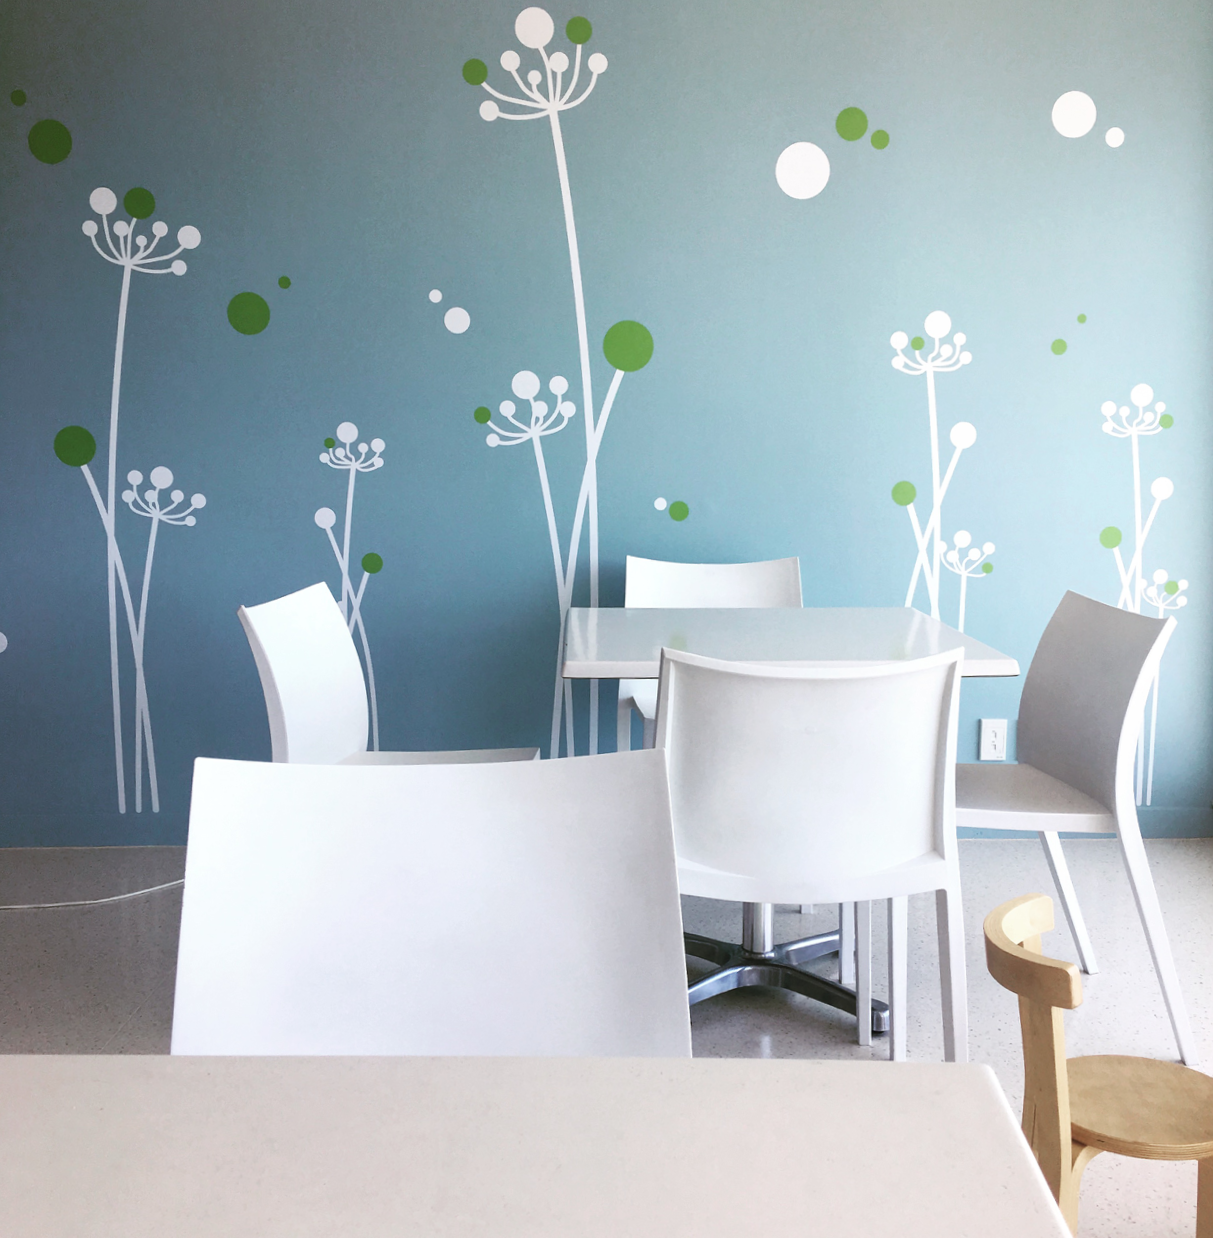 ronald mcdonald house family dining space with white furniture and wall decals